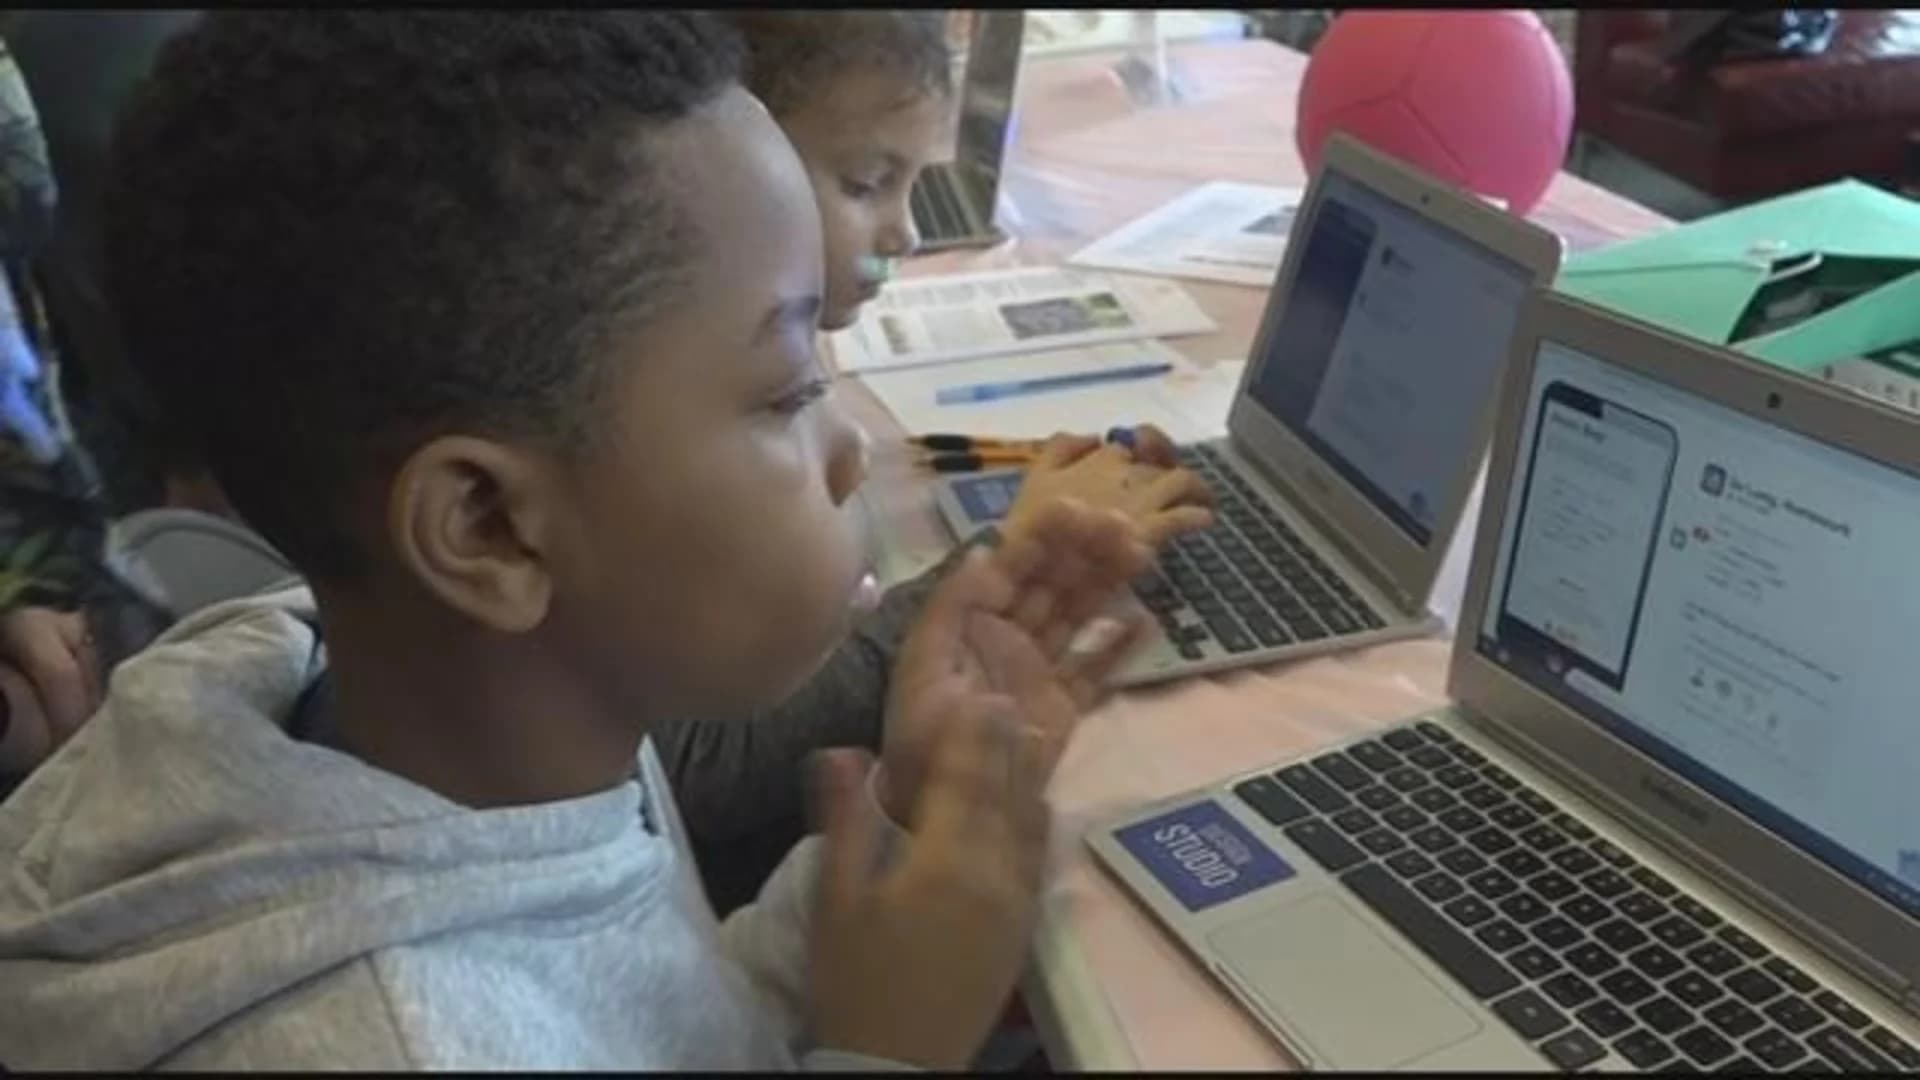 Nonprofit gets kids excited about science and technology